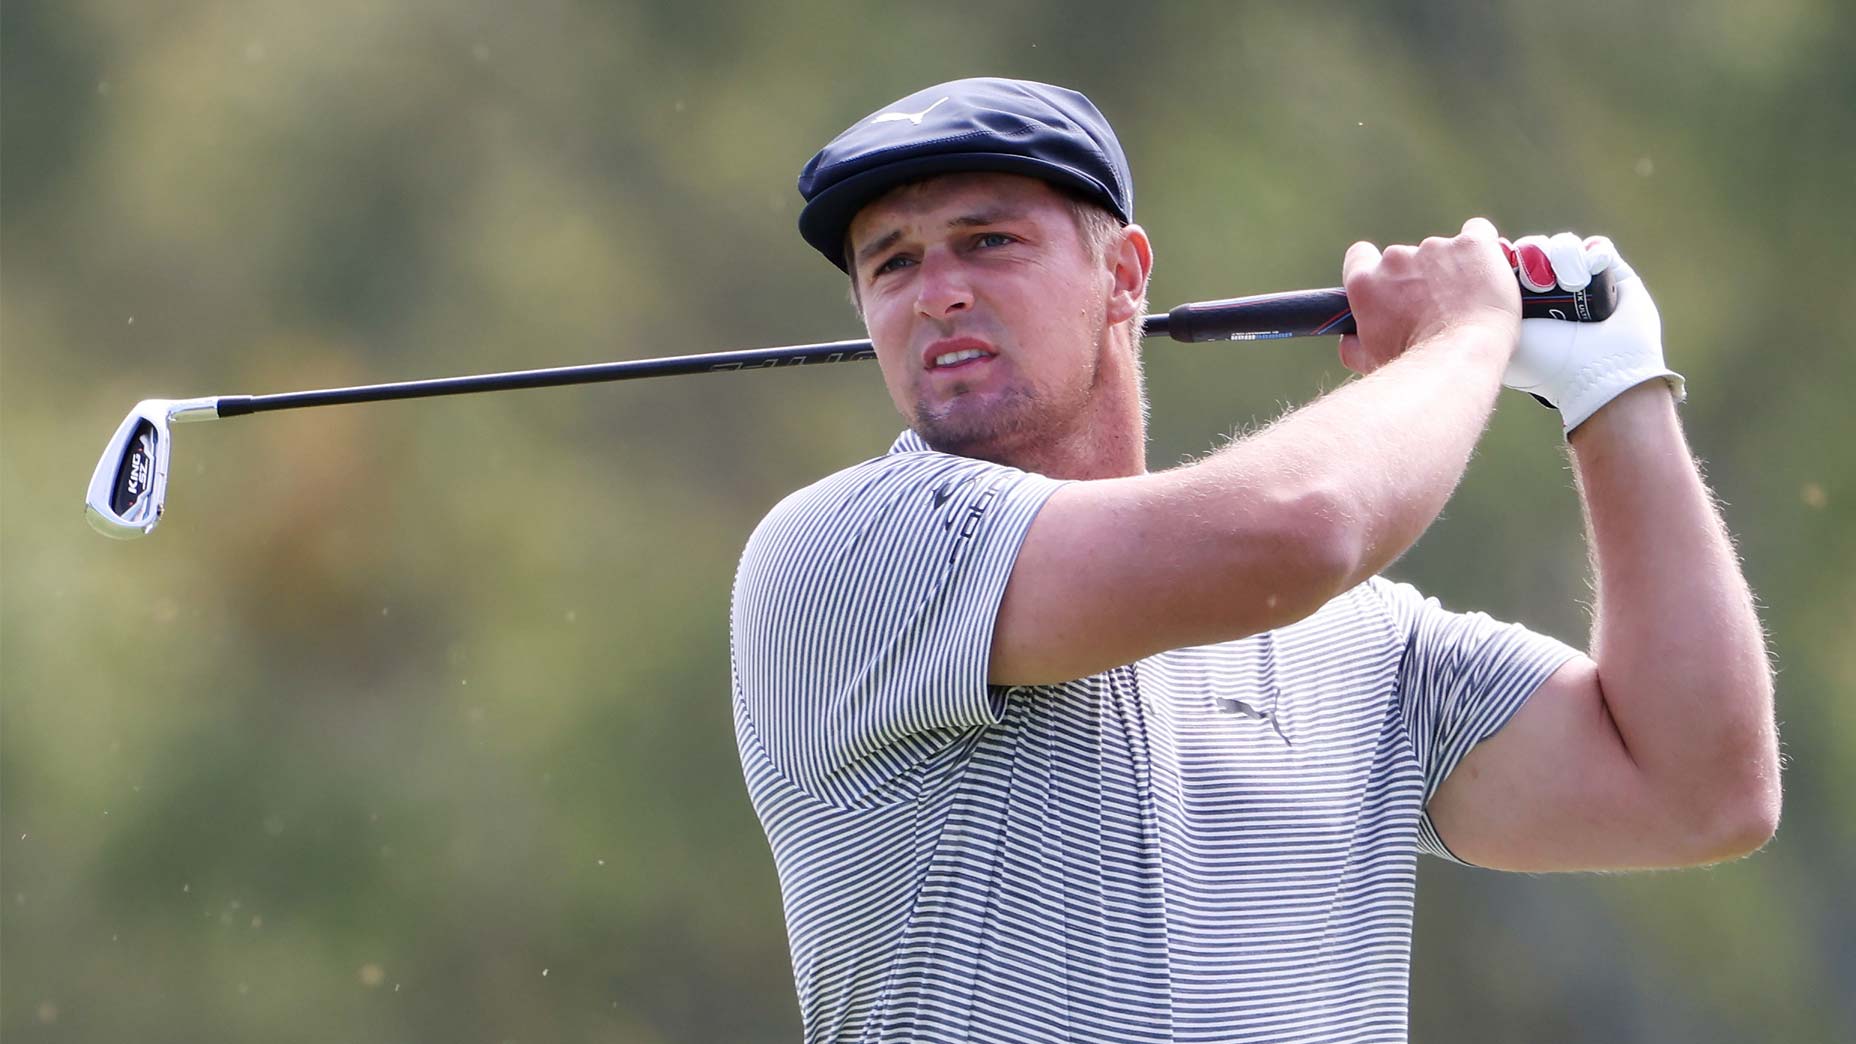 The irons Bryson DeChambeau used to conquer Winged Foot's wild rough